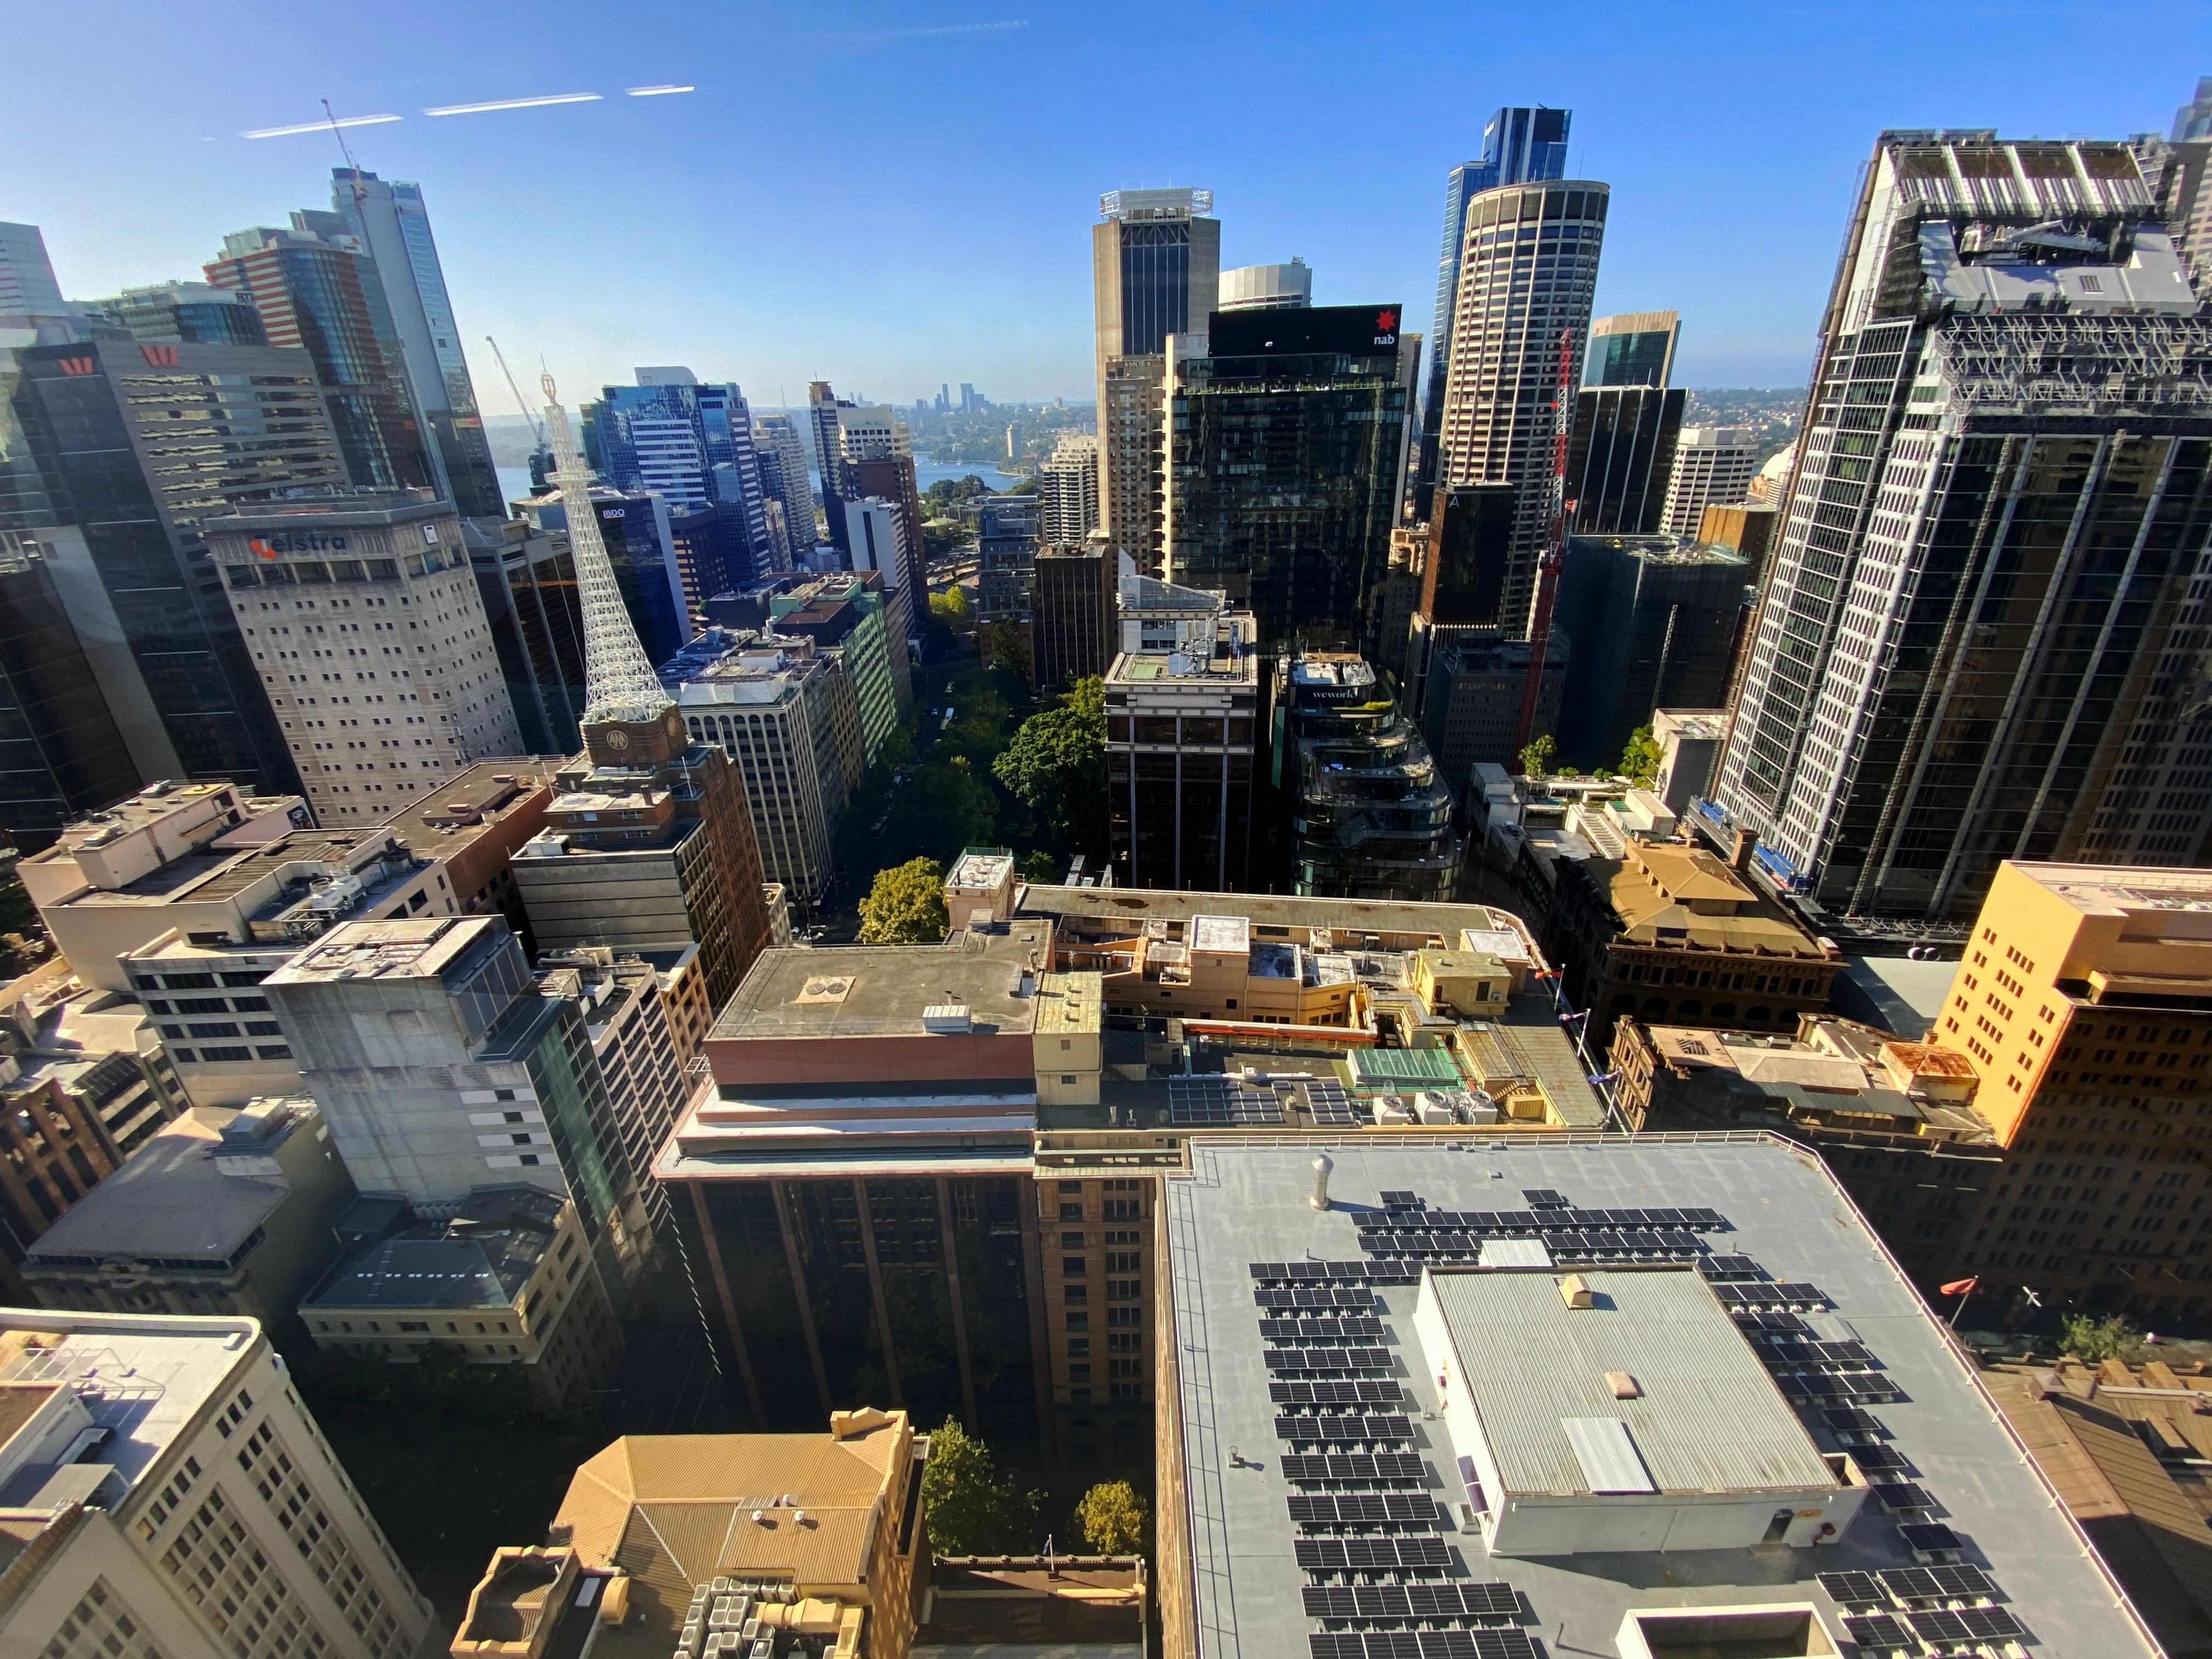 A photo taken from the 28th floor of our office building looking out over Sydney's CBD. Lots of tall buildings, with shorter ones directly below. The sky is a lovely blue colour and what I think is North Sydney is distantly visible through a gap between two of the buildings.